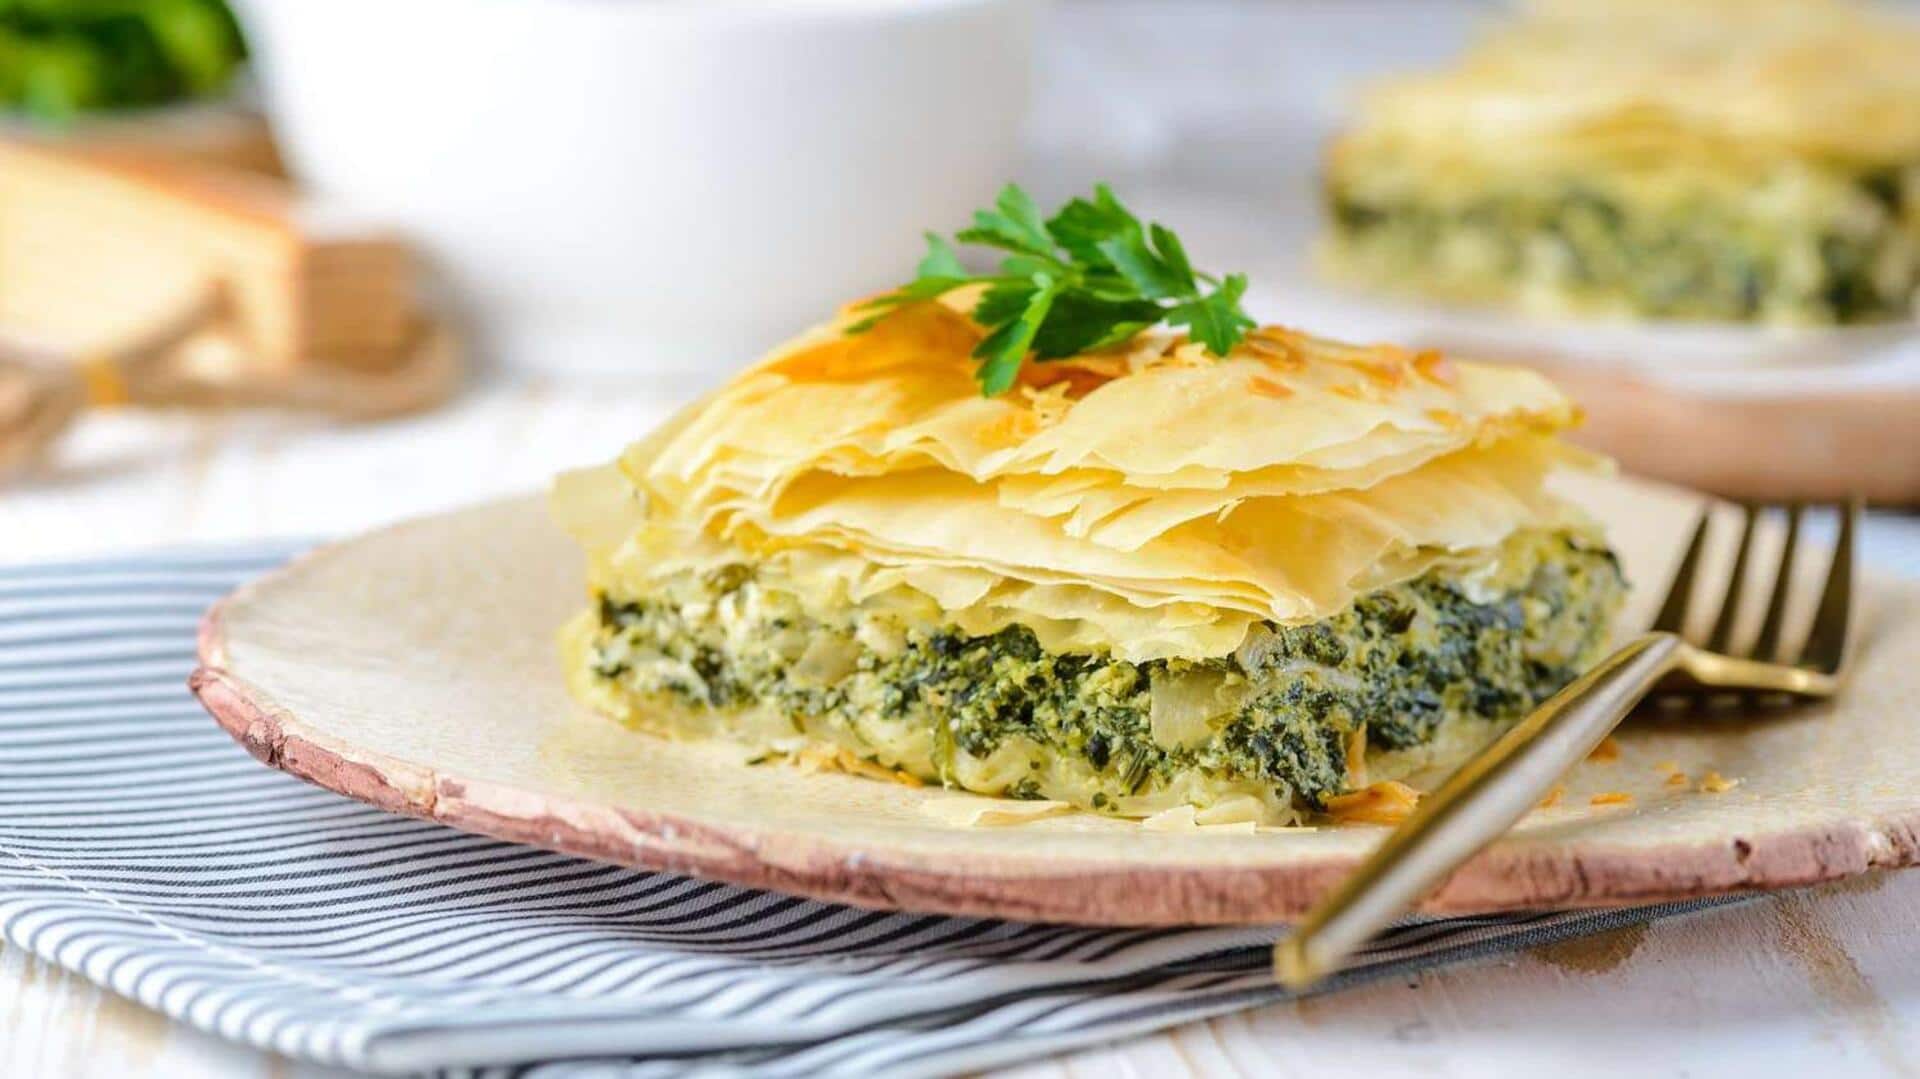 Greece on your plate: Check out this delicious spanakopita recipe